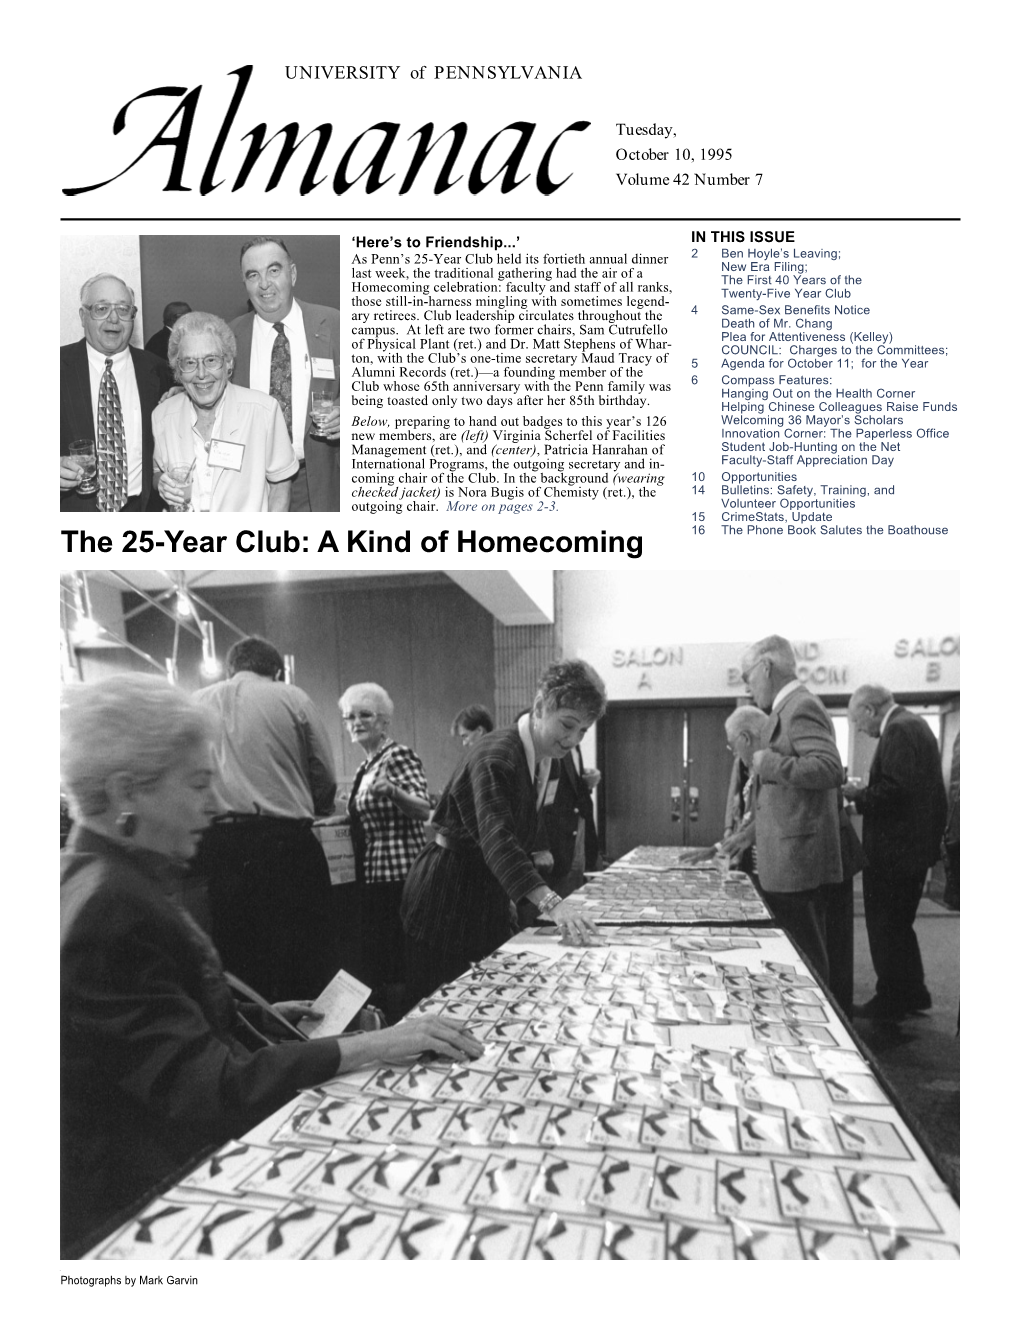 The 25-Year Club: a Kind of Homecoming 16 the Phone Book Salutes the Boathouse